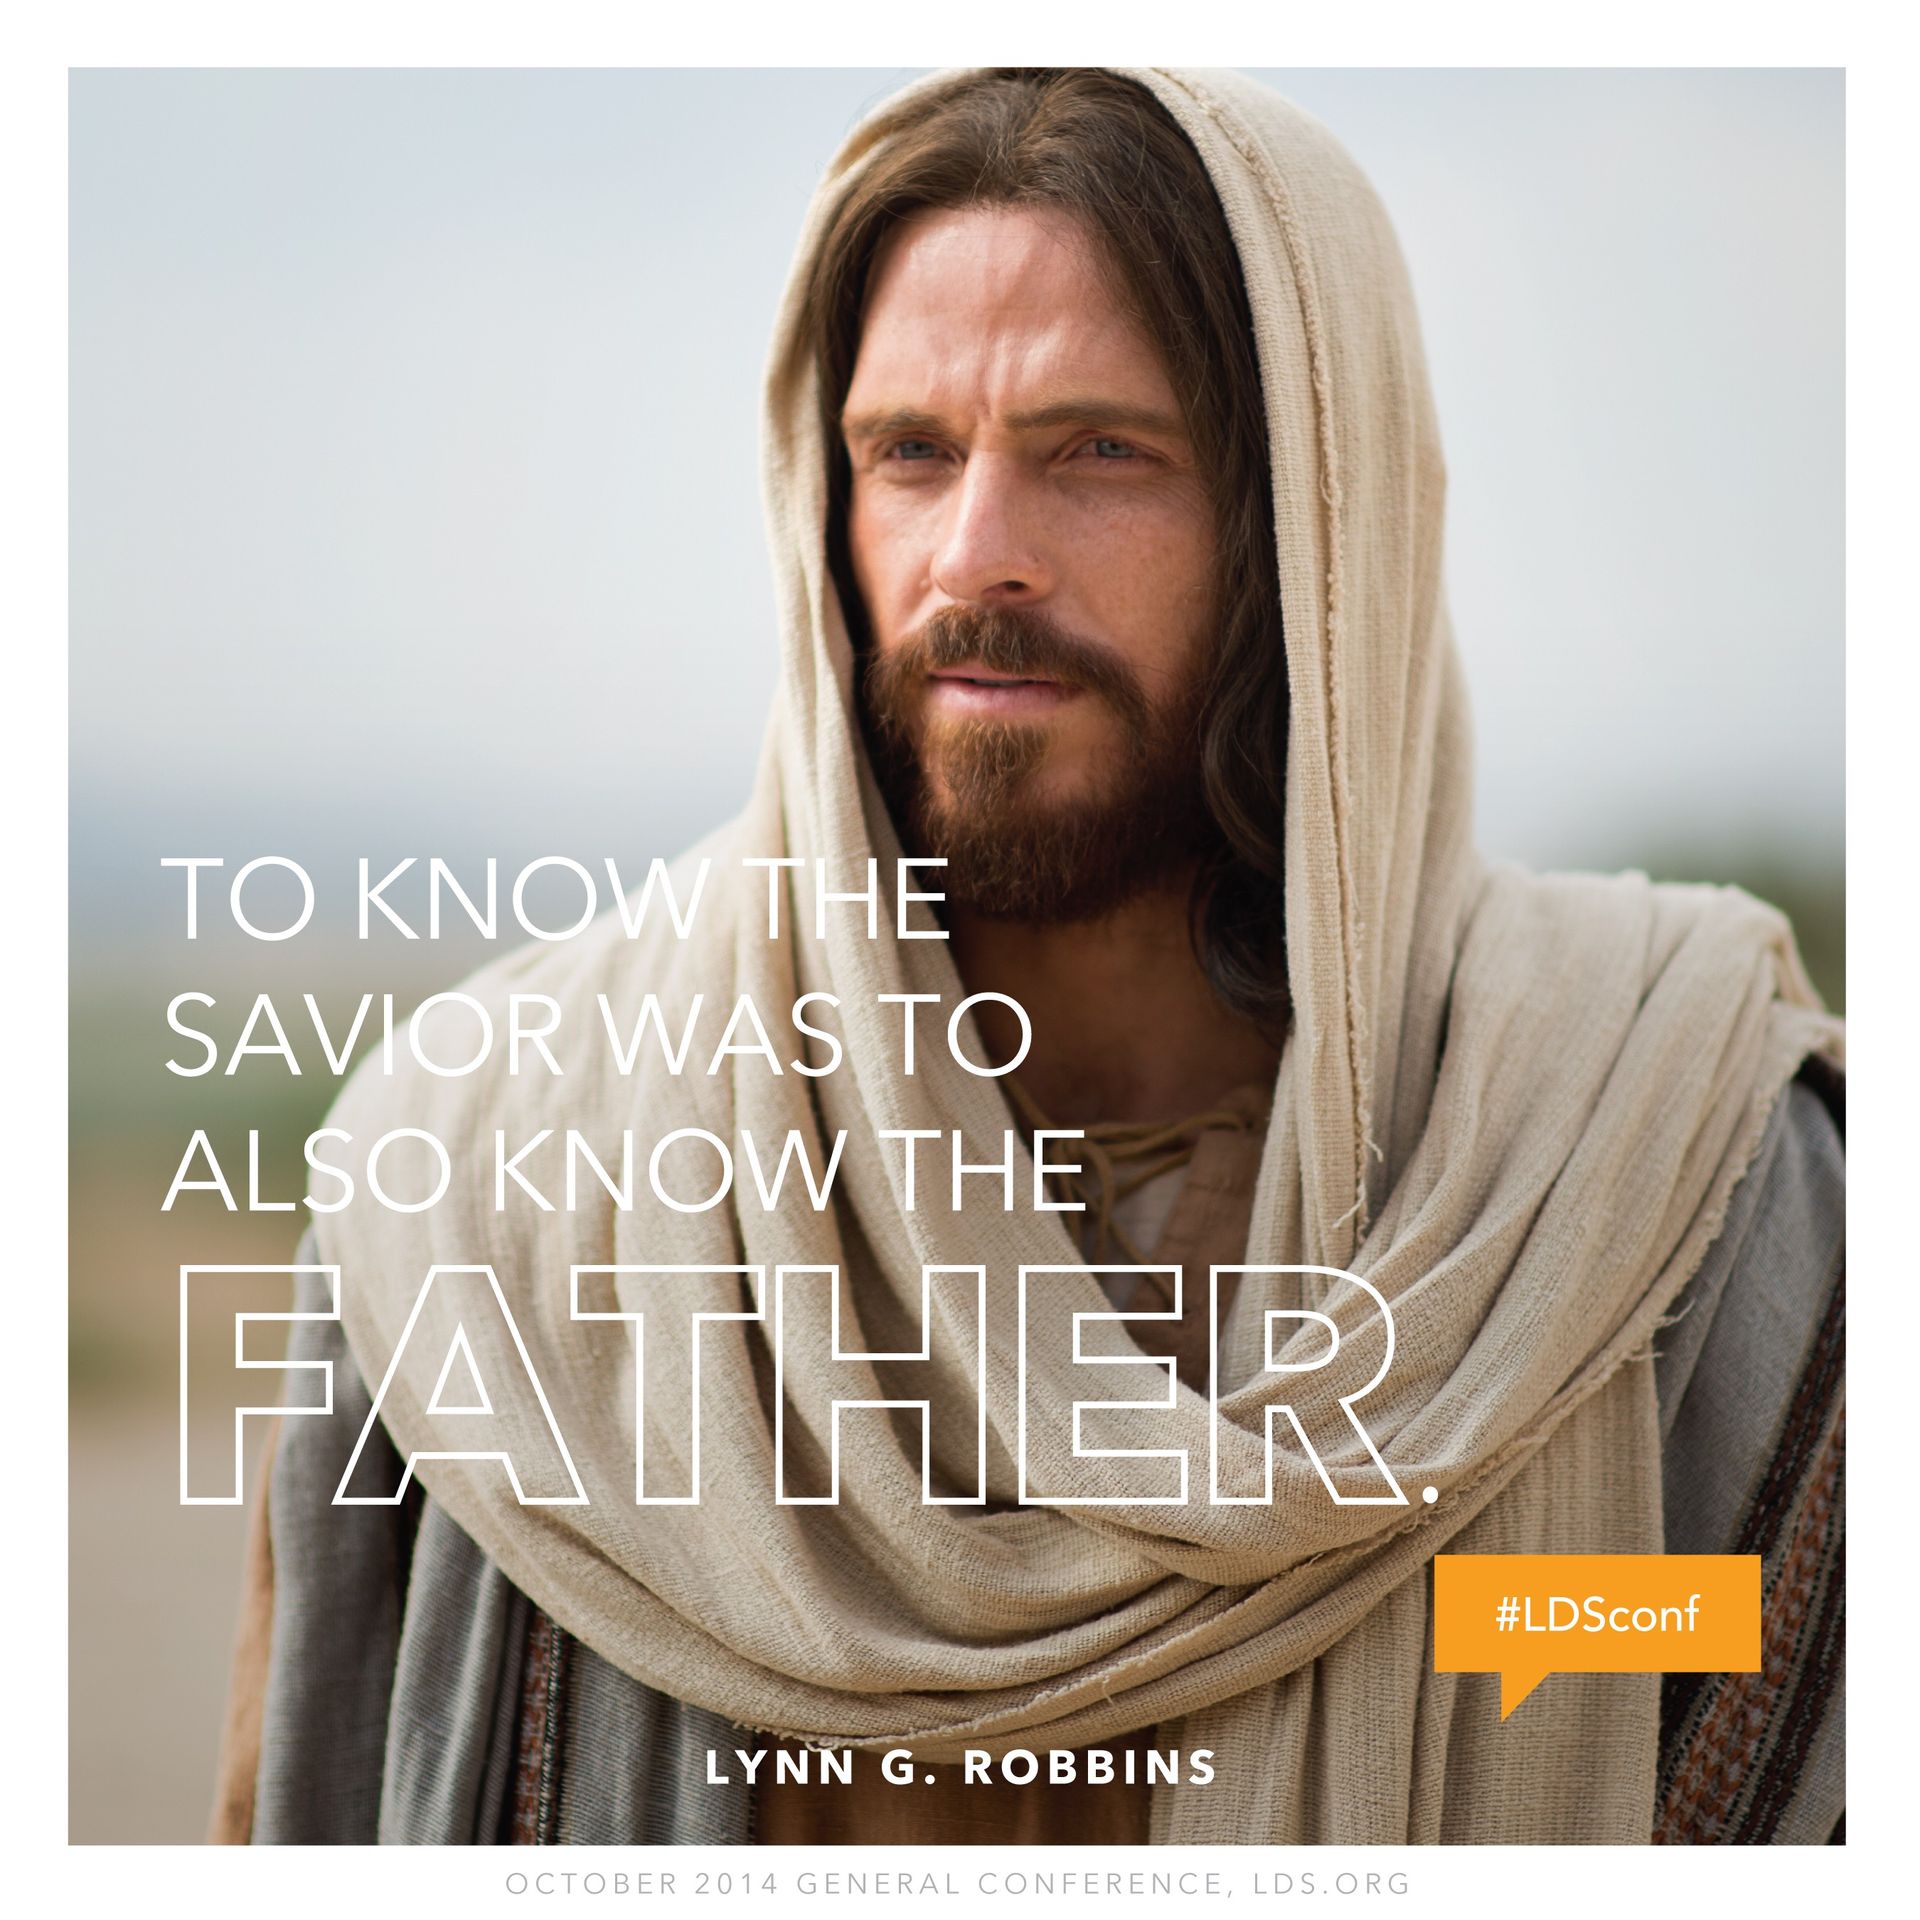 “To know the Savior was to also know the Father.”—Elder Lynn G. Robbins, “Which Way Do You Face?” © undefined ipCode 1.